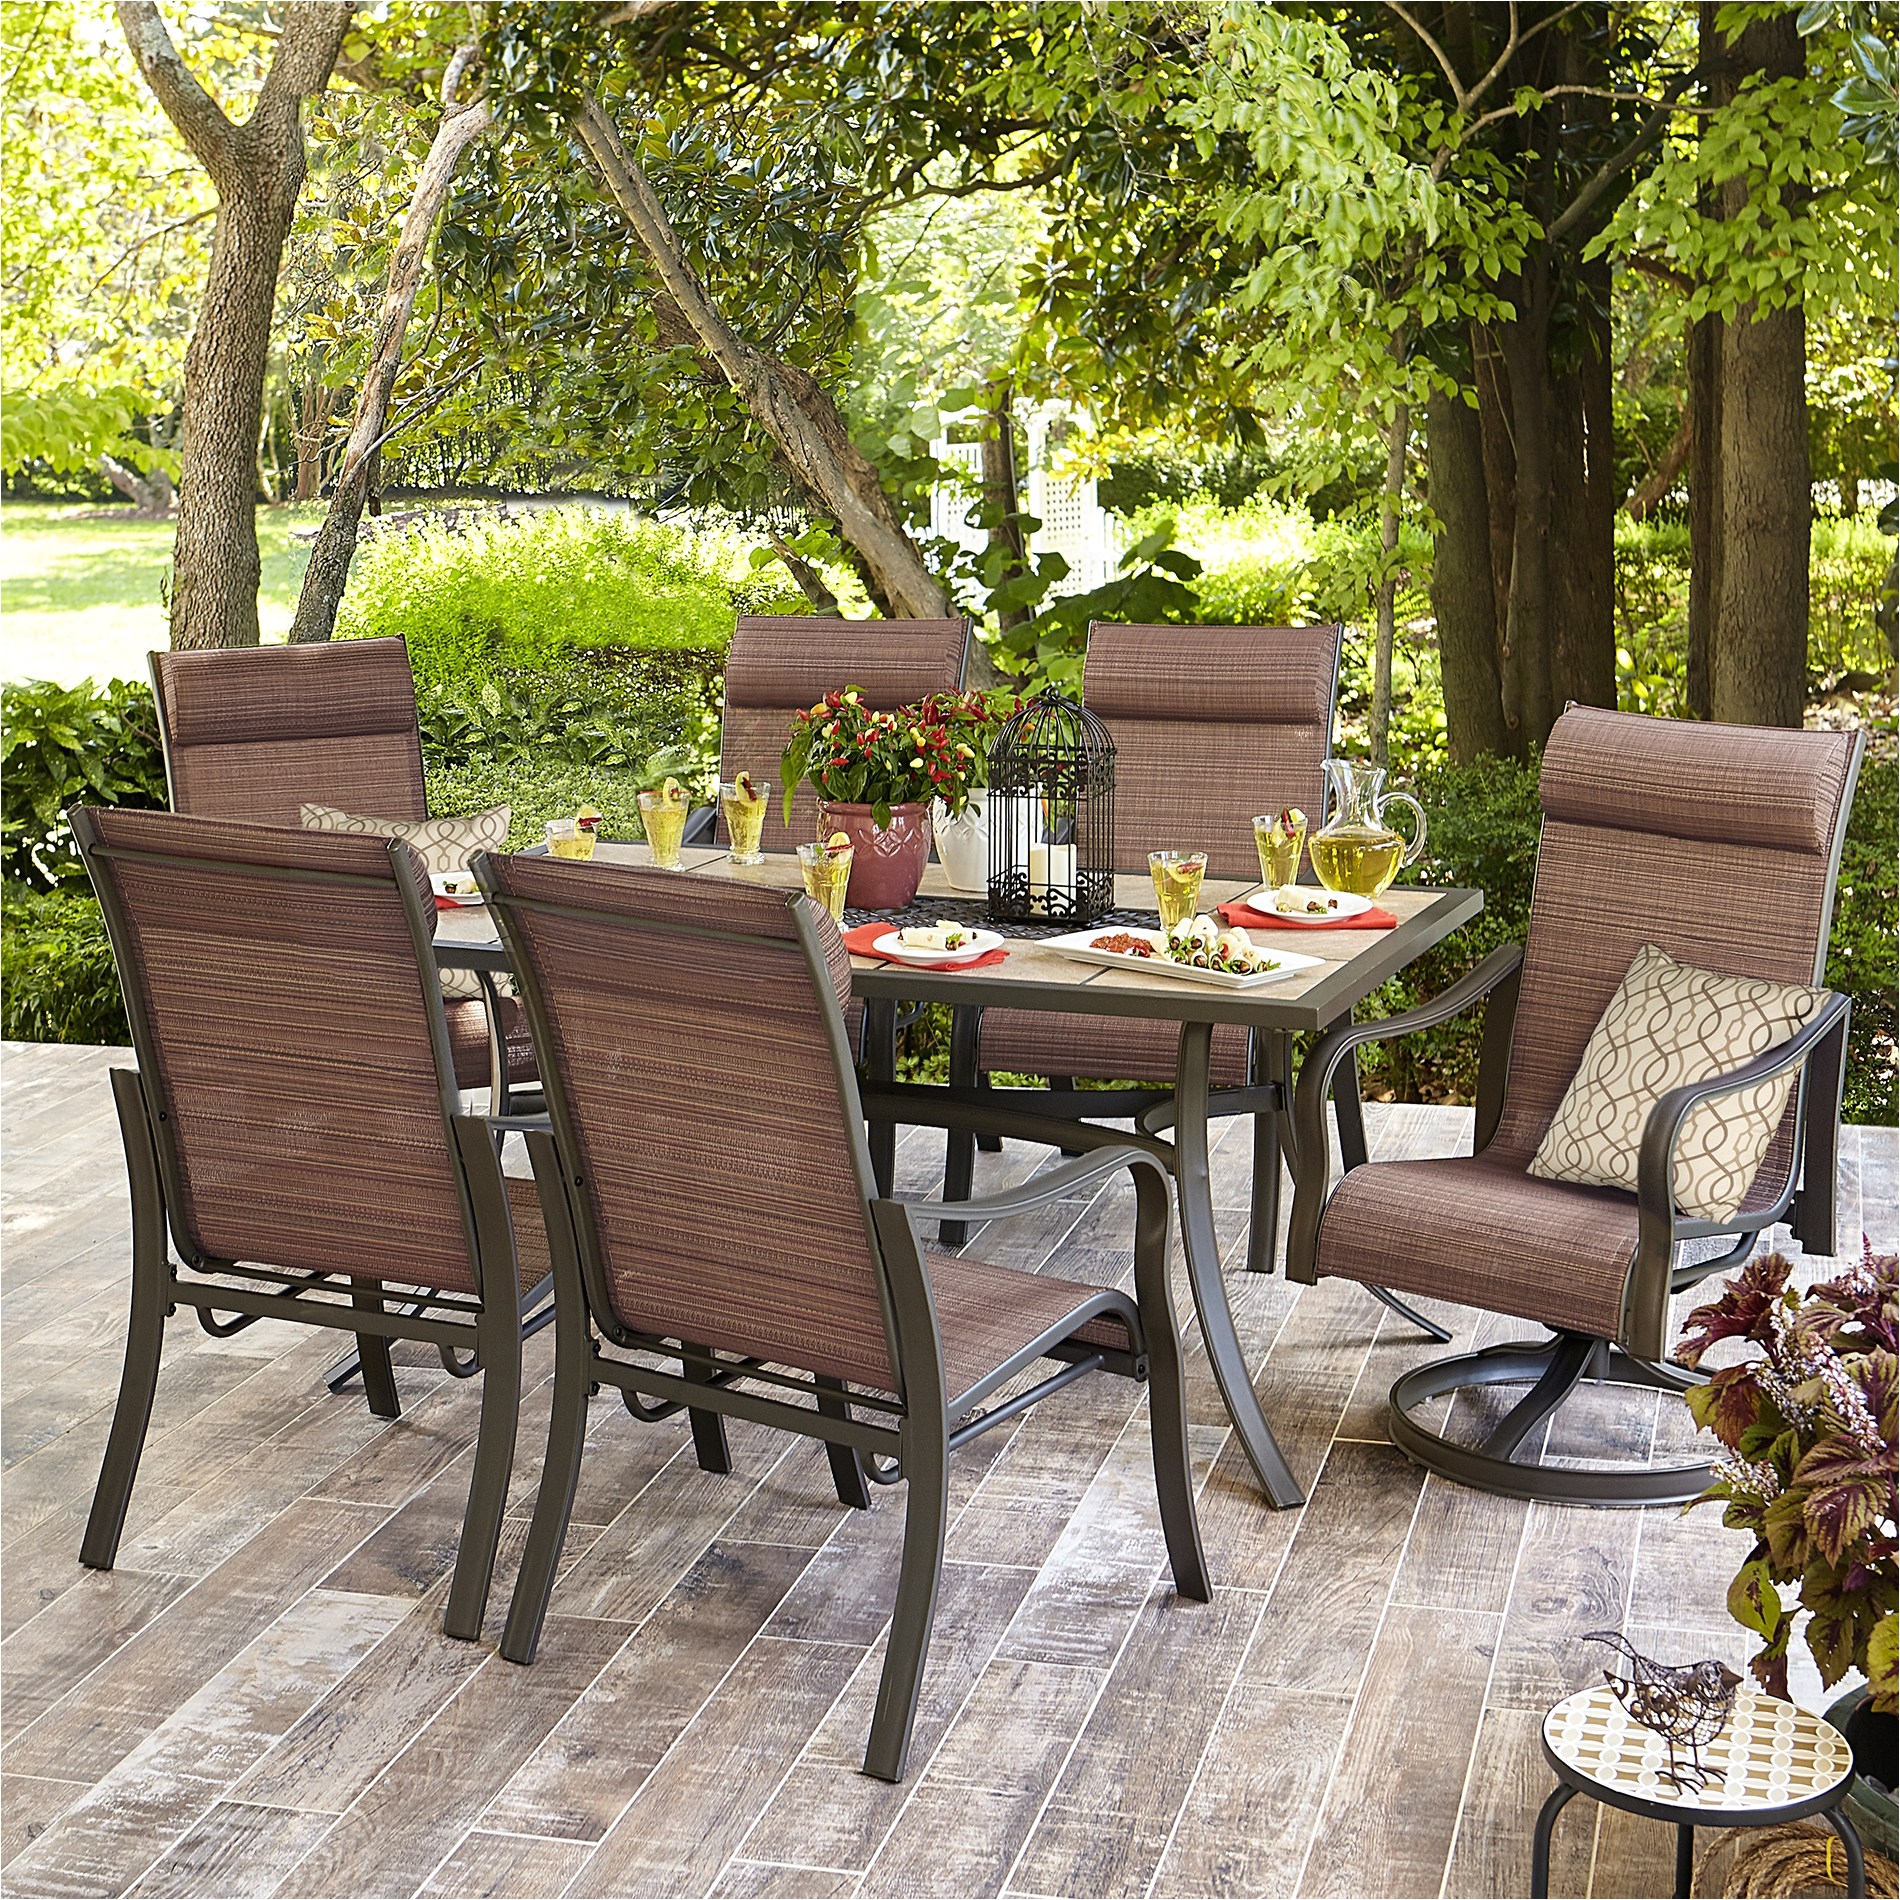 peaceably cheap wicker furniture kmart patio umbrellas sears patio furniture clearance discount wicker furniture jaclyn smith